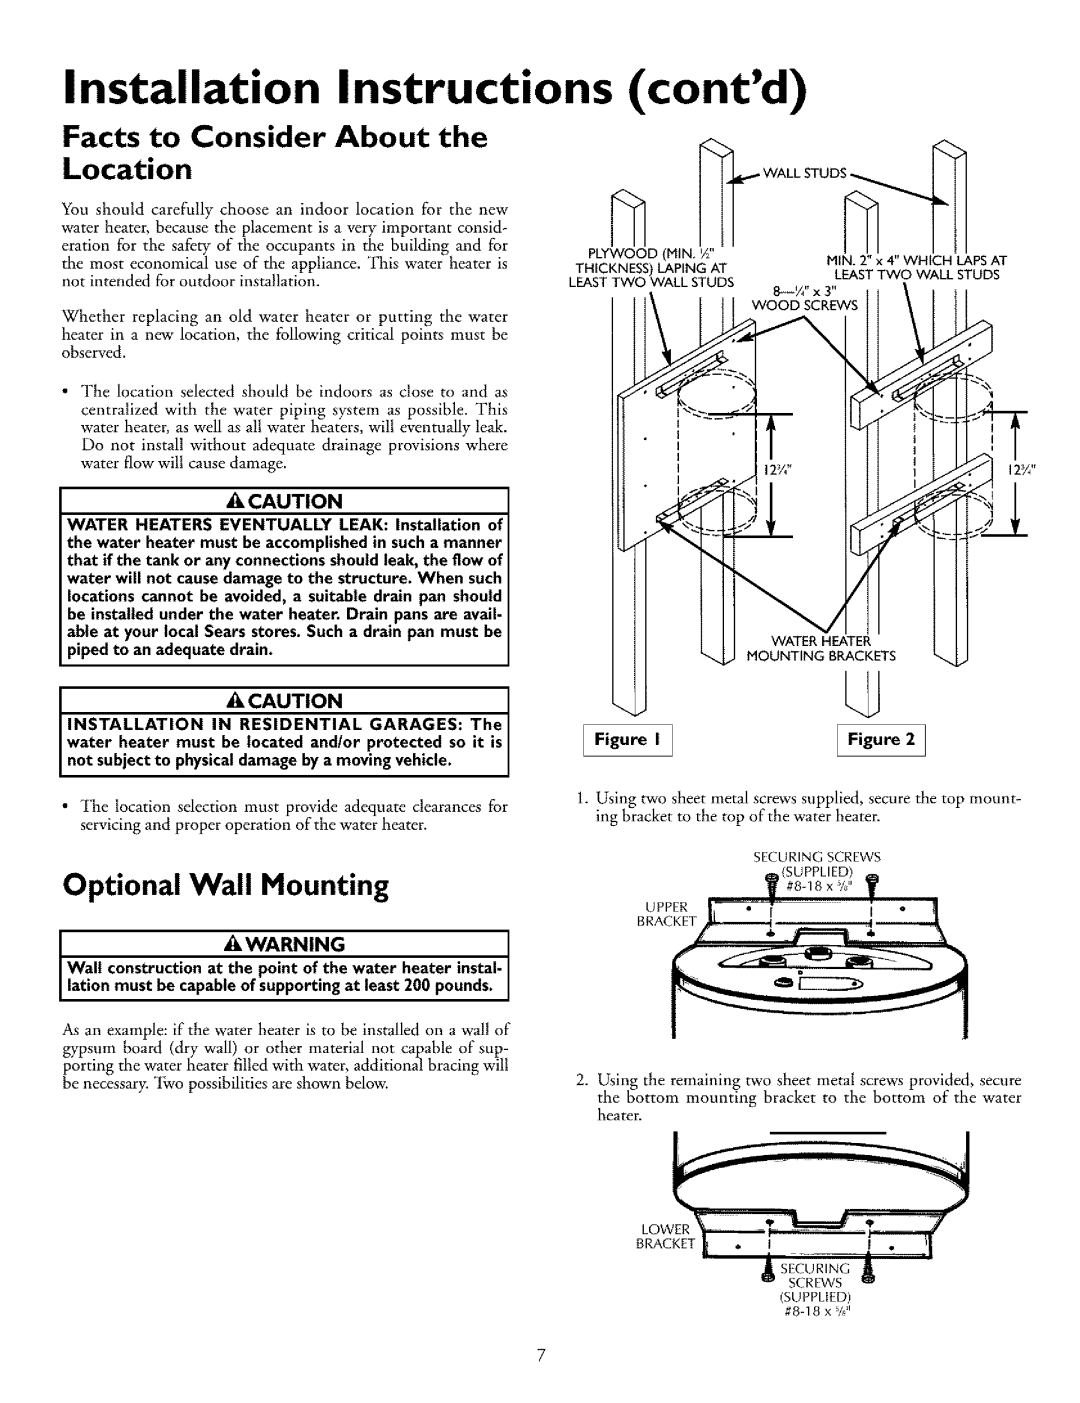 Kenmore 153.31702 Installation Instructions contd, Facts to Consider About the Location, Optional Wall Mounting 